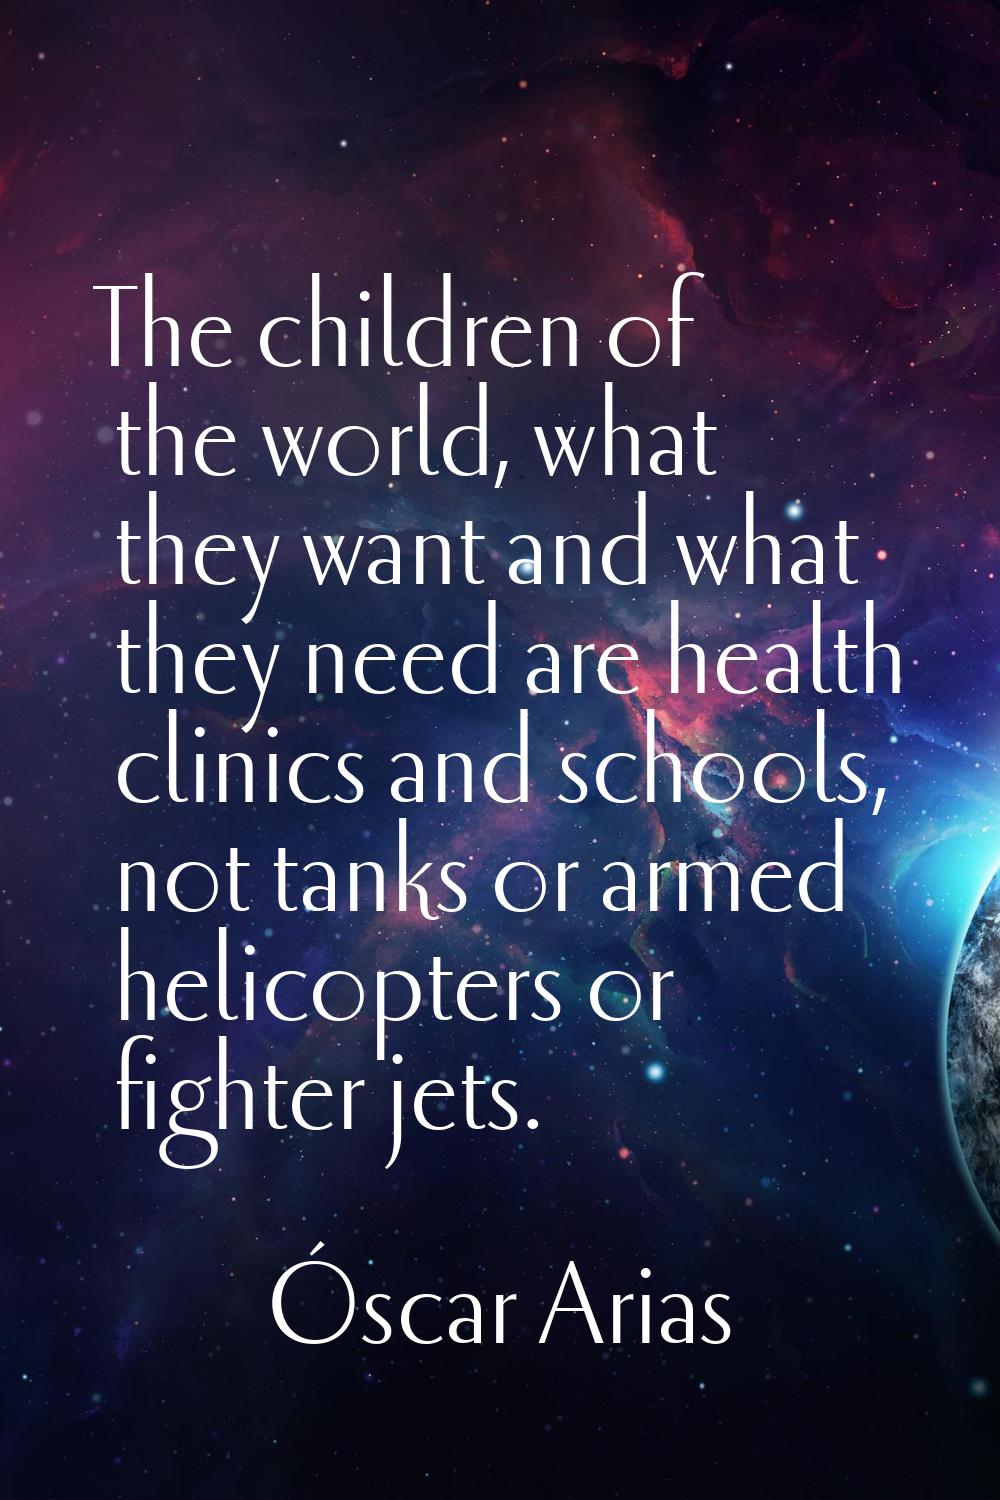 The children of the world, what they want and what they need are health clinics and schools, not ta